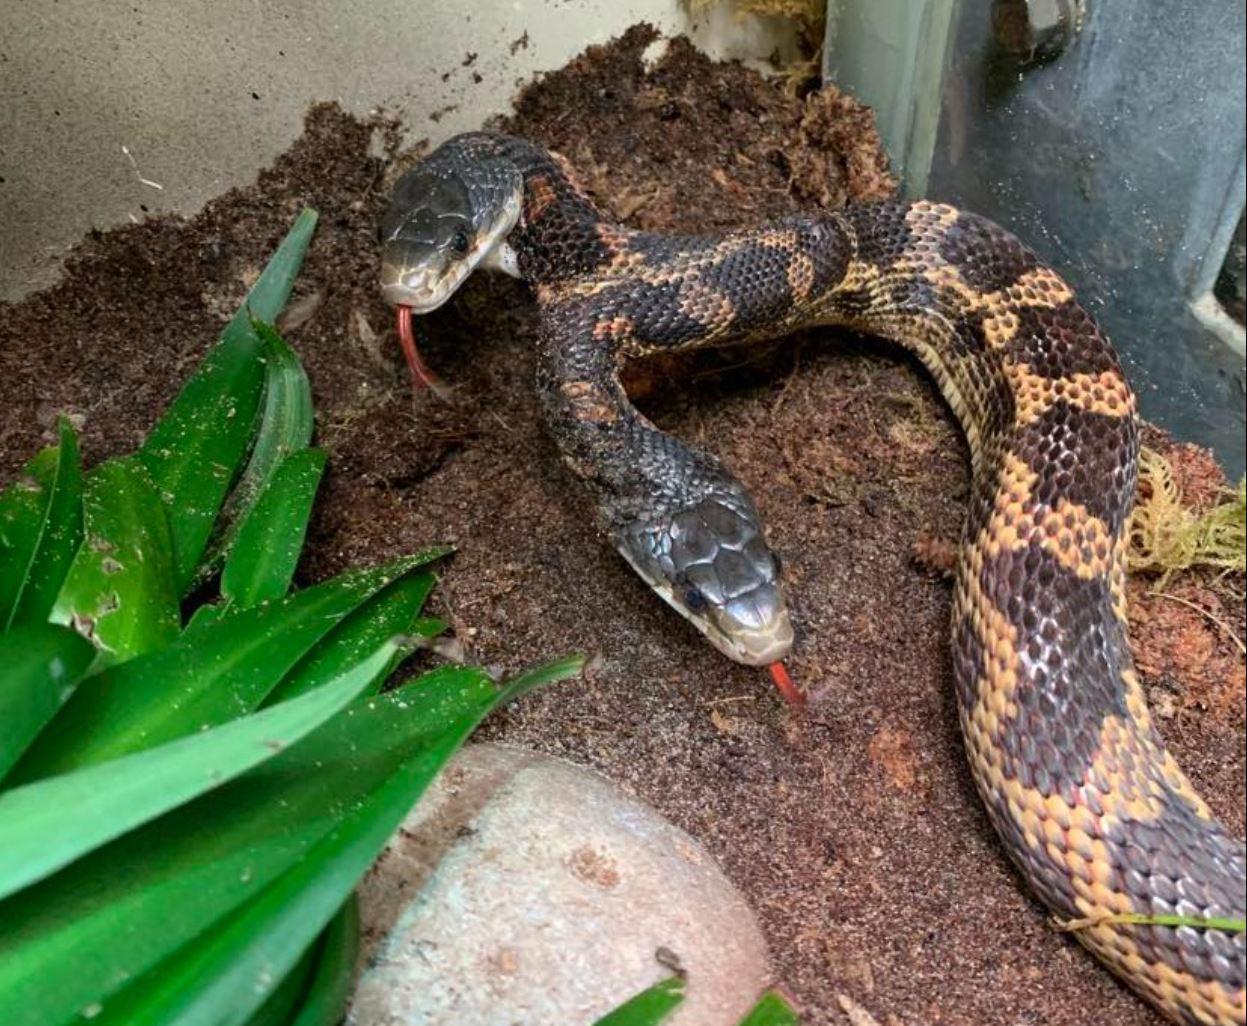 A two-headed snake returns after a neck injury